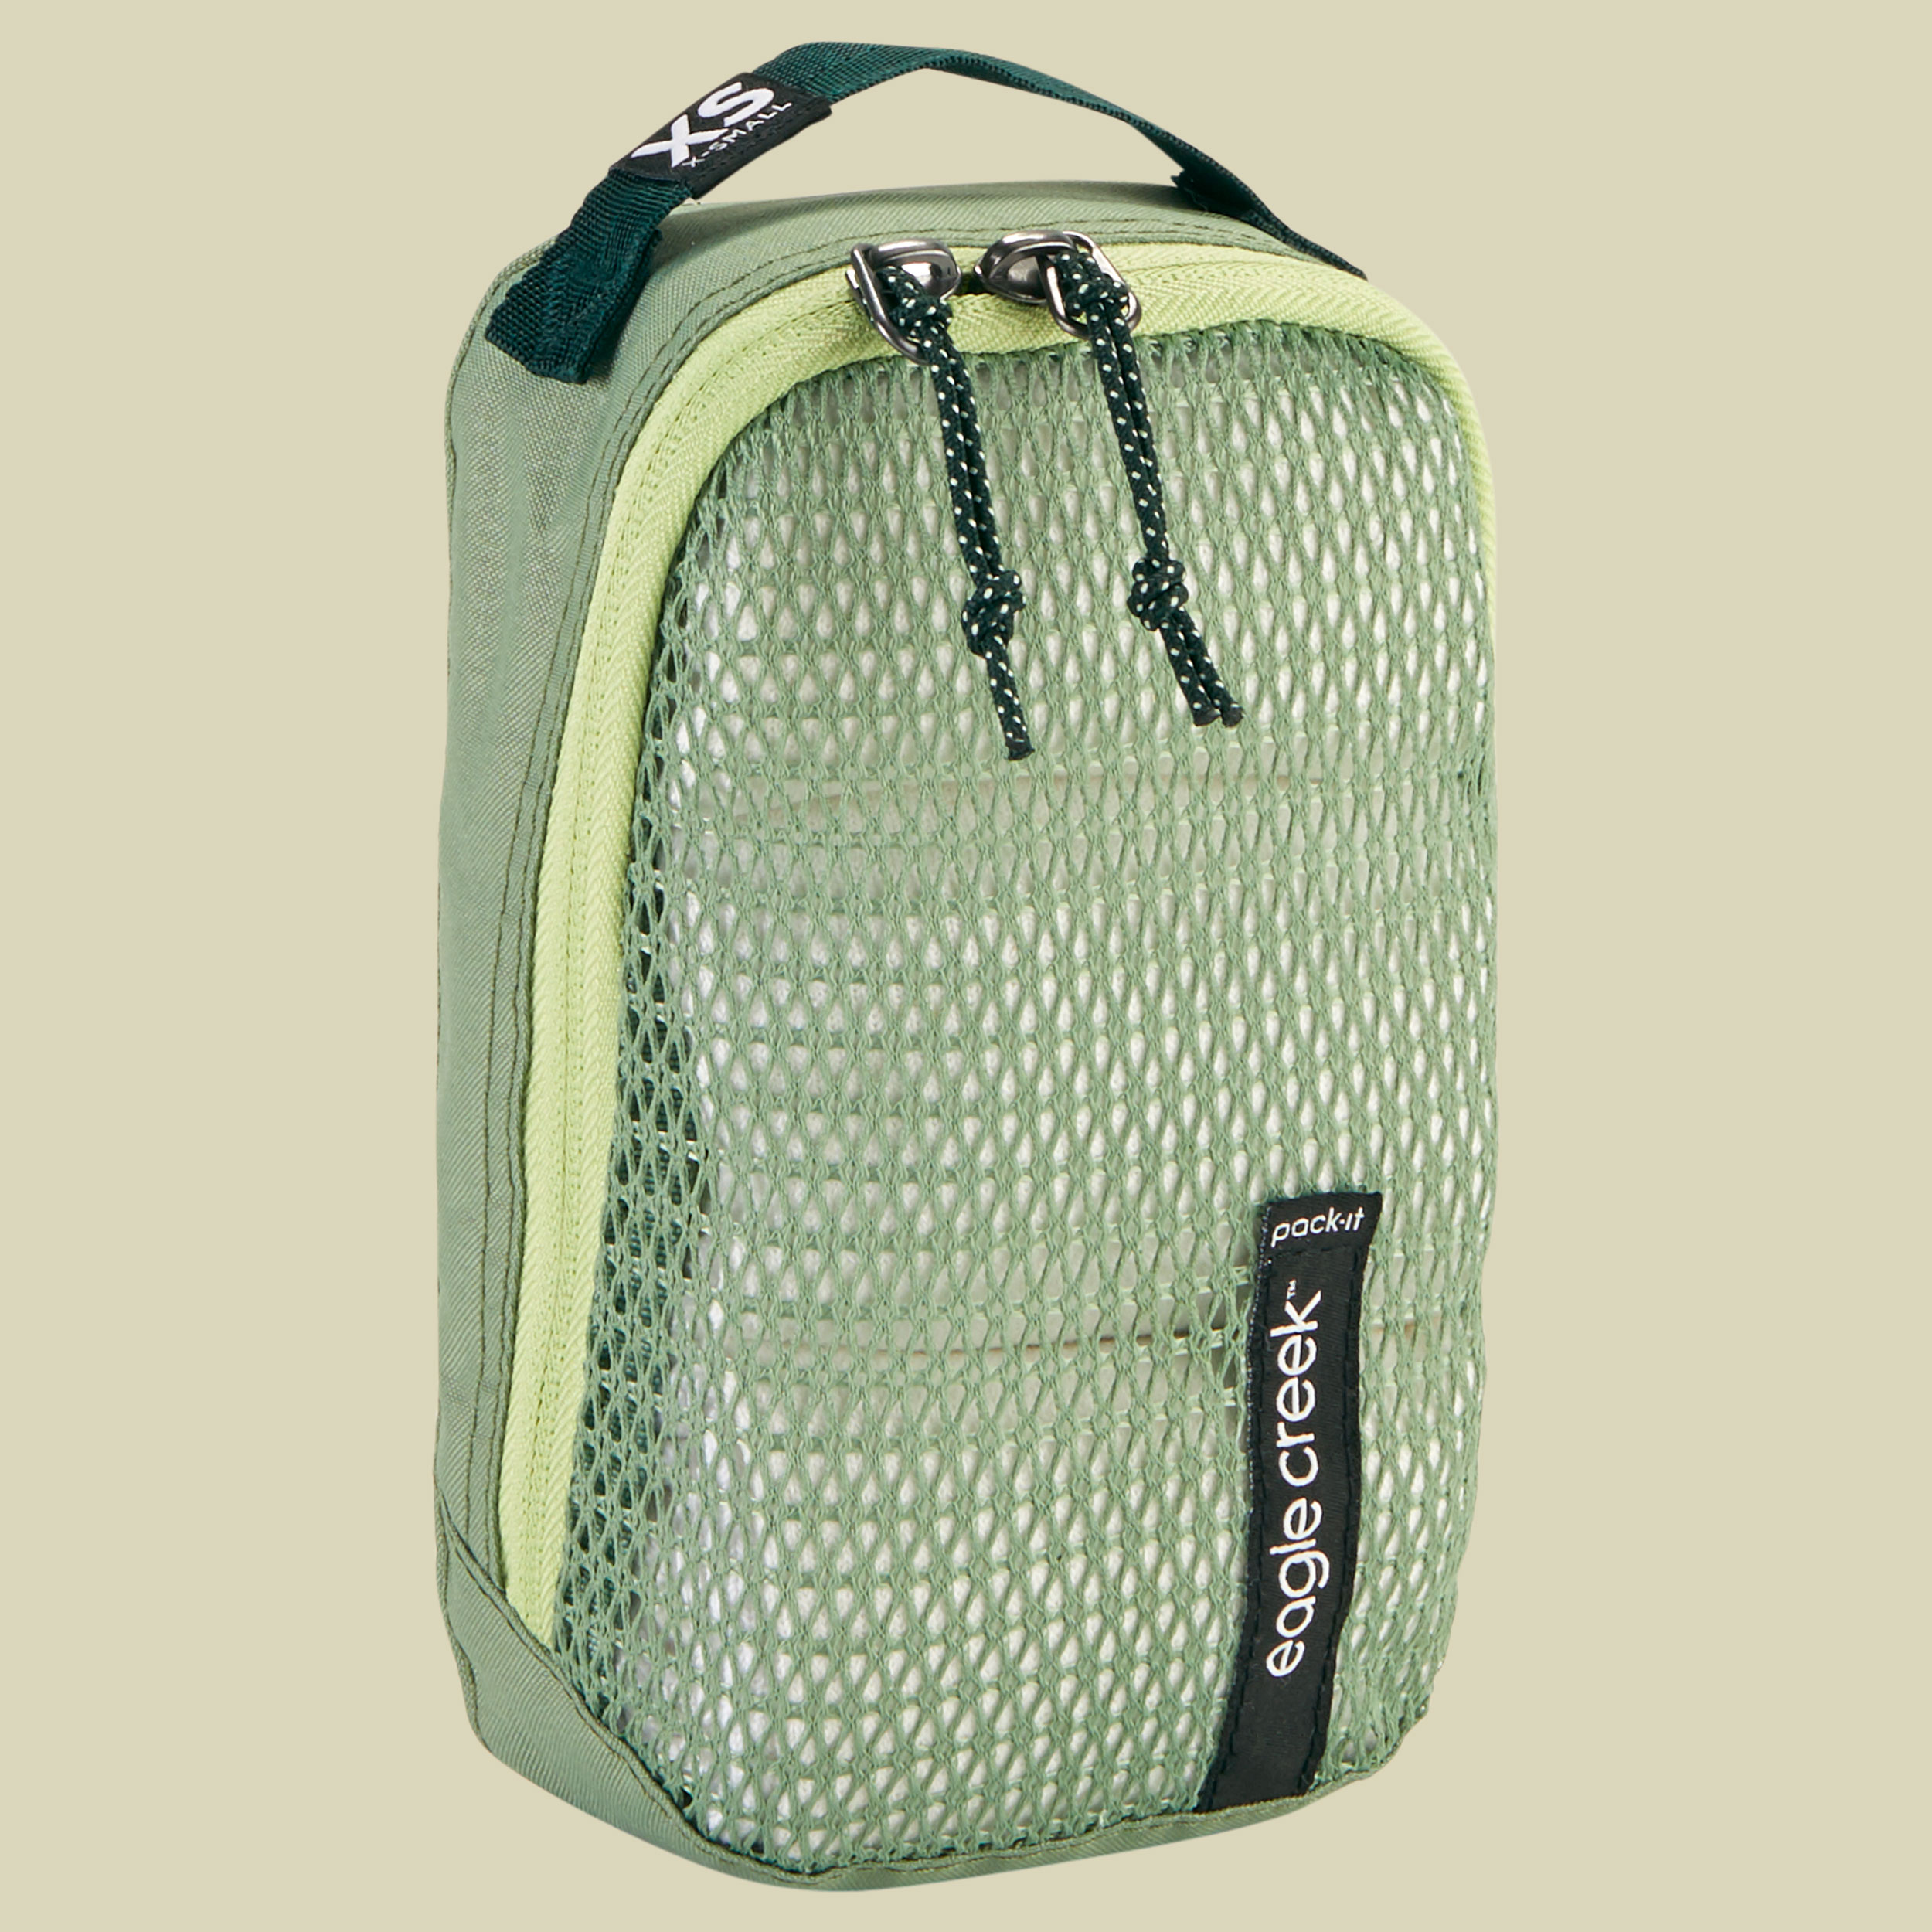 Pack-It Reveal Cube XS Größe XS Farbe mossy green